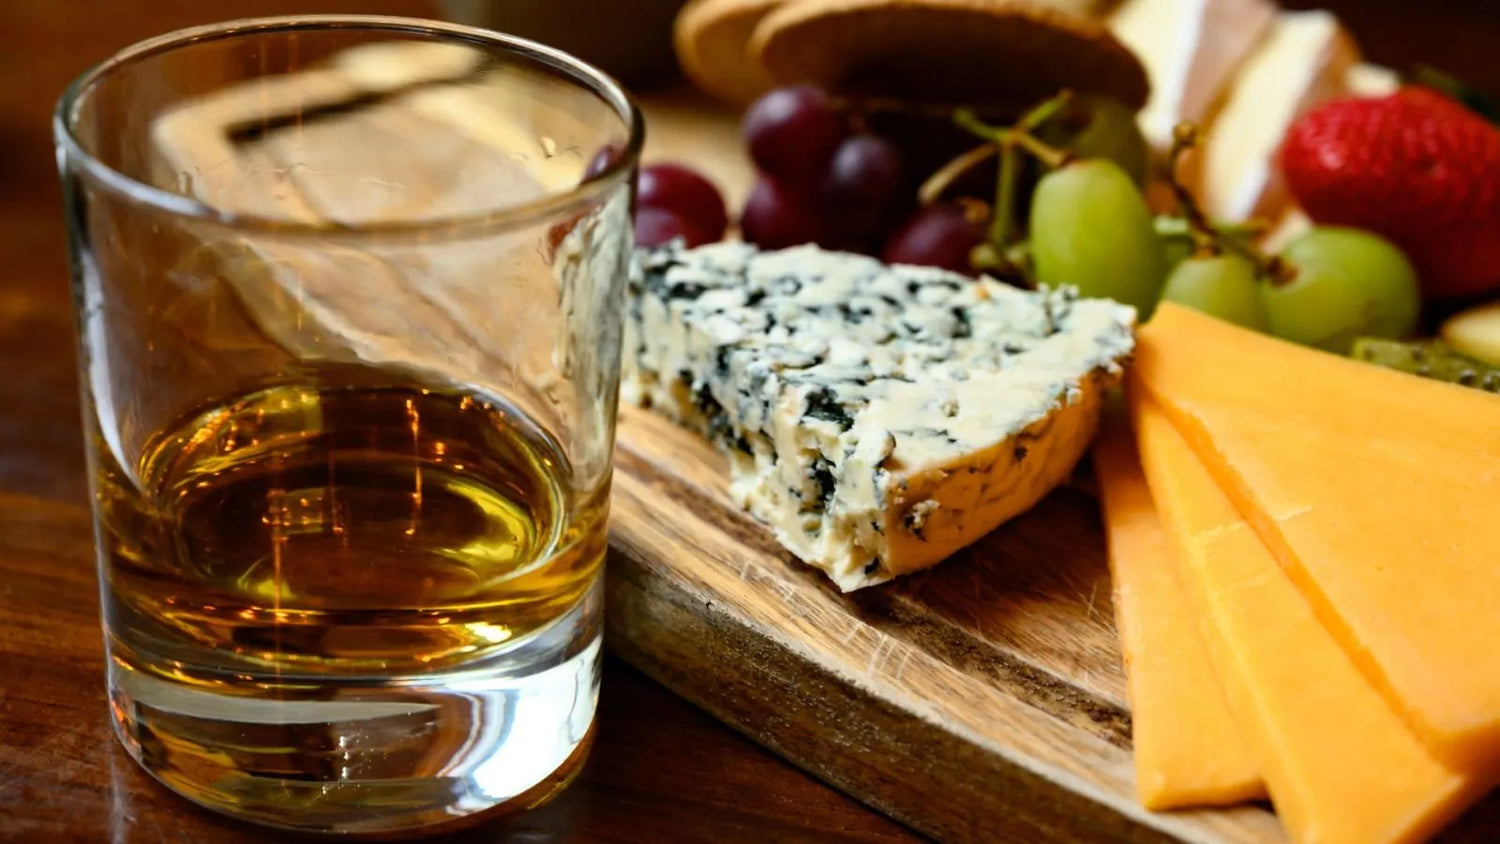 Pairing Perfection - Mixture of Limited Edition Whiskies with Gourmet Foods